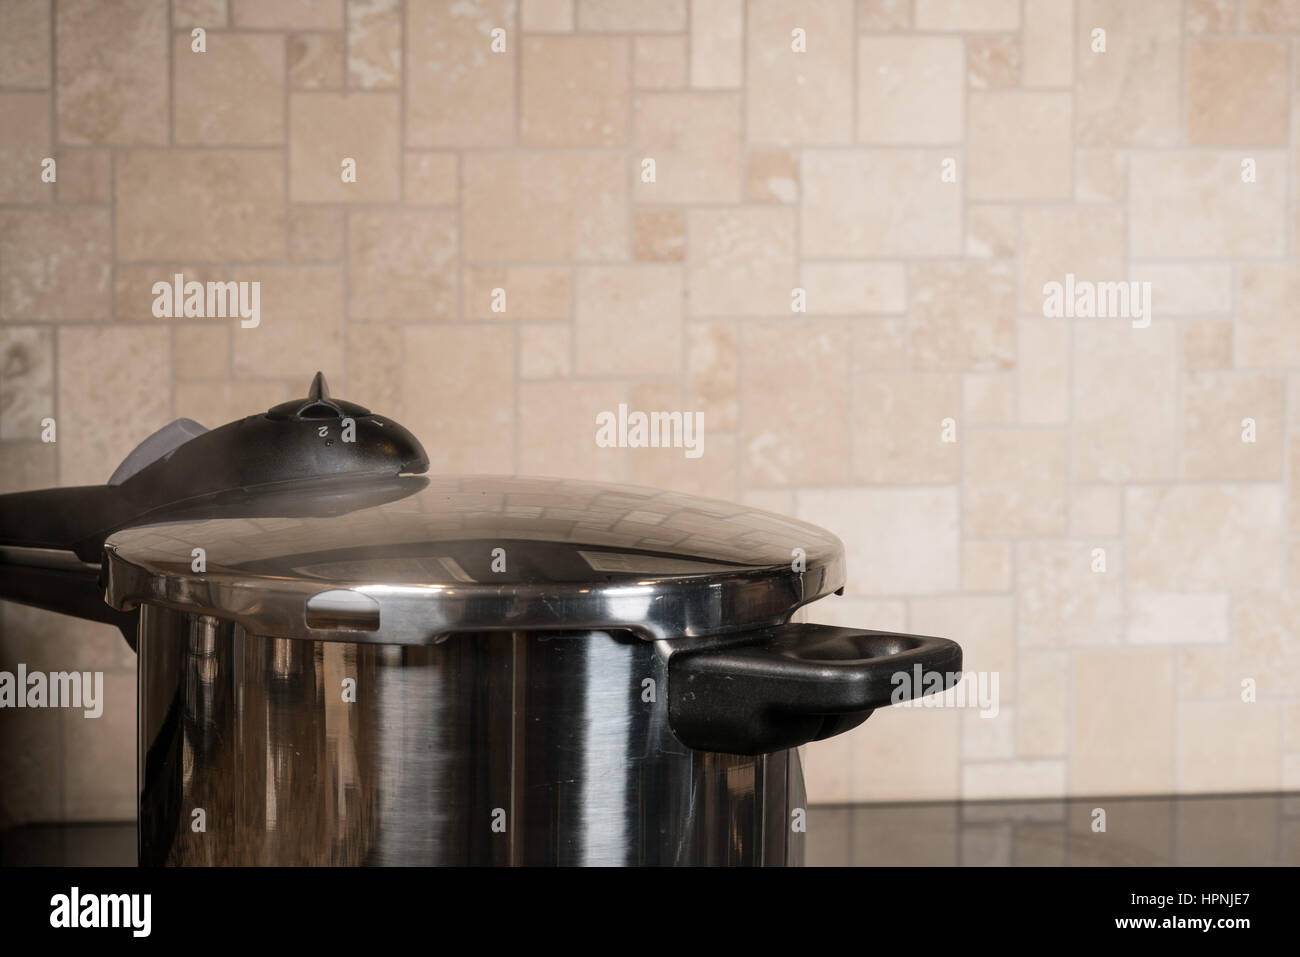 Stainless steel pressure cooker letting off steam on a modern induction cooking hob with glass top Stock Photo